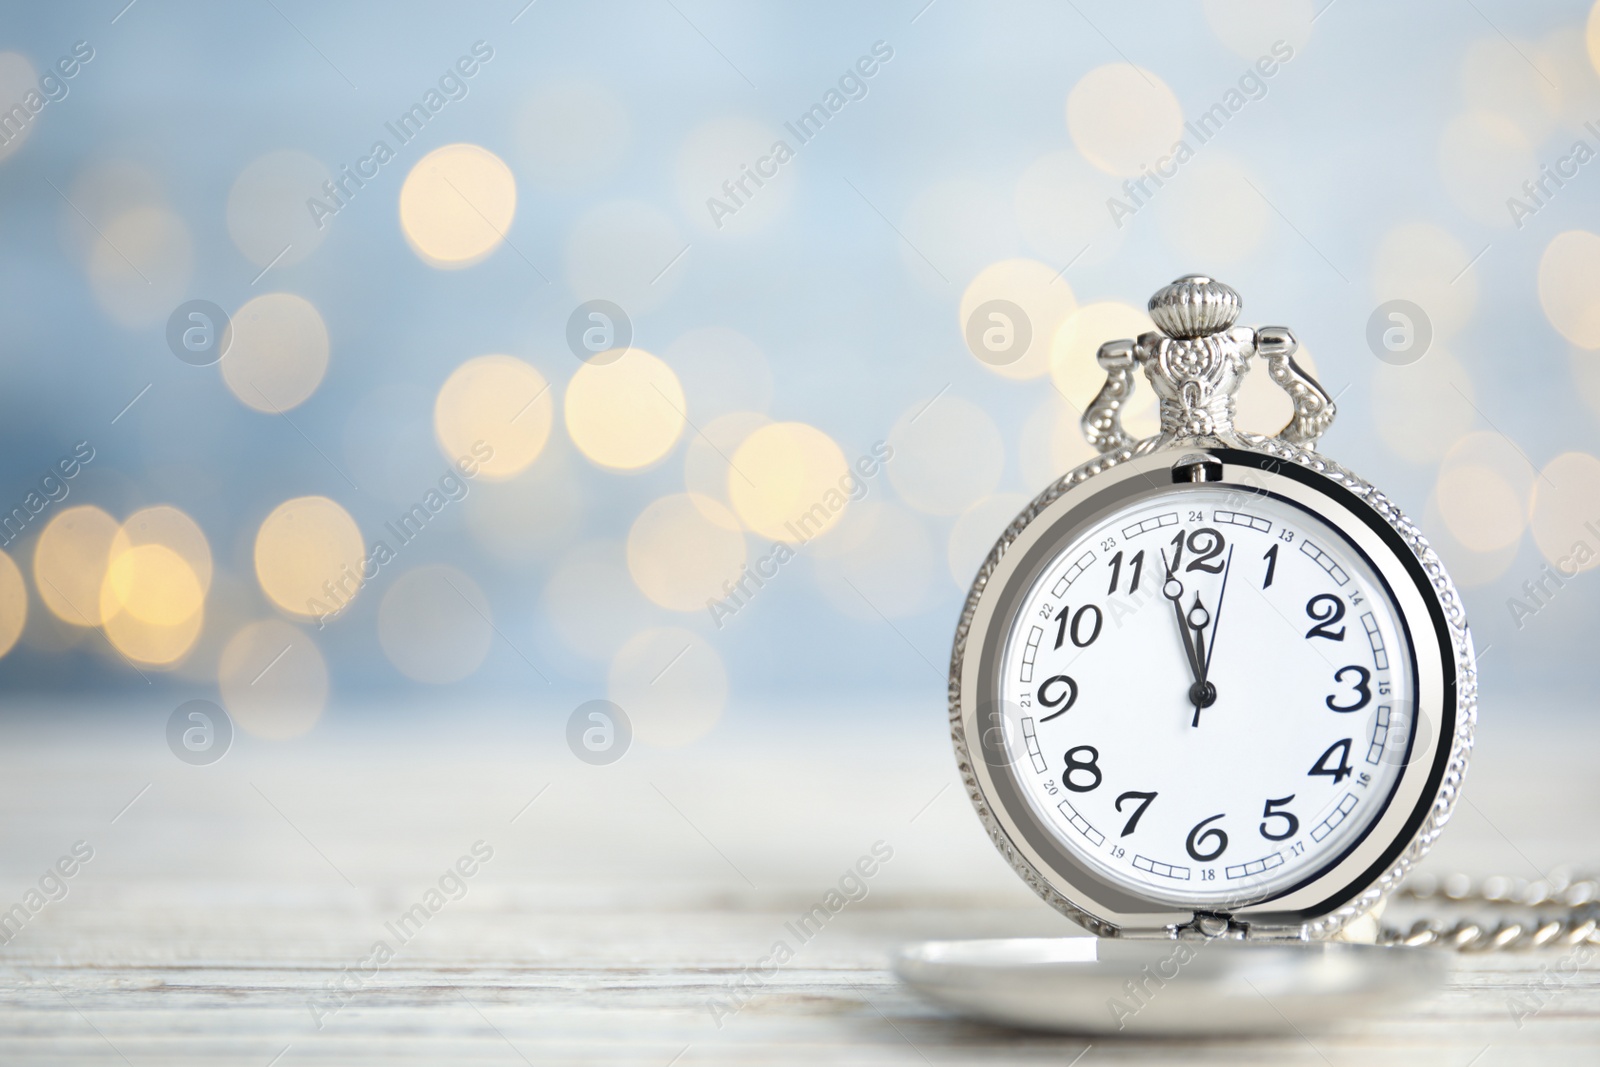 Photo of Pocket watch on table against blurred lights, space for text. New Year countdown